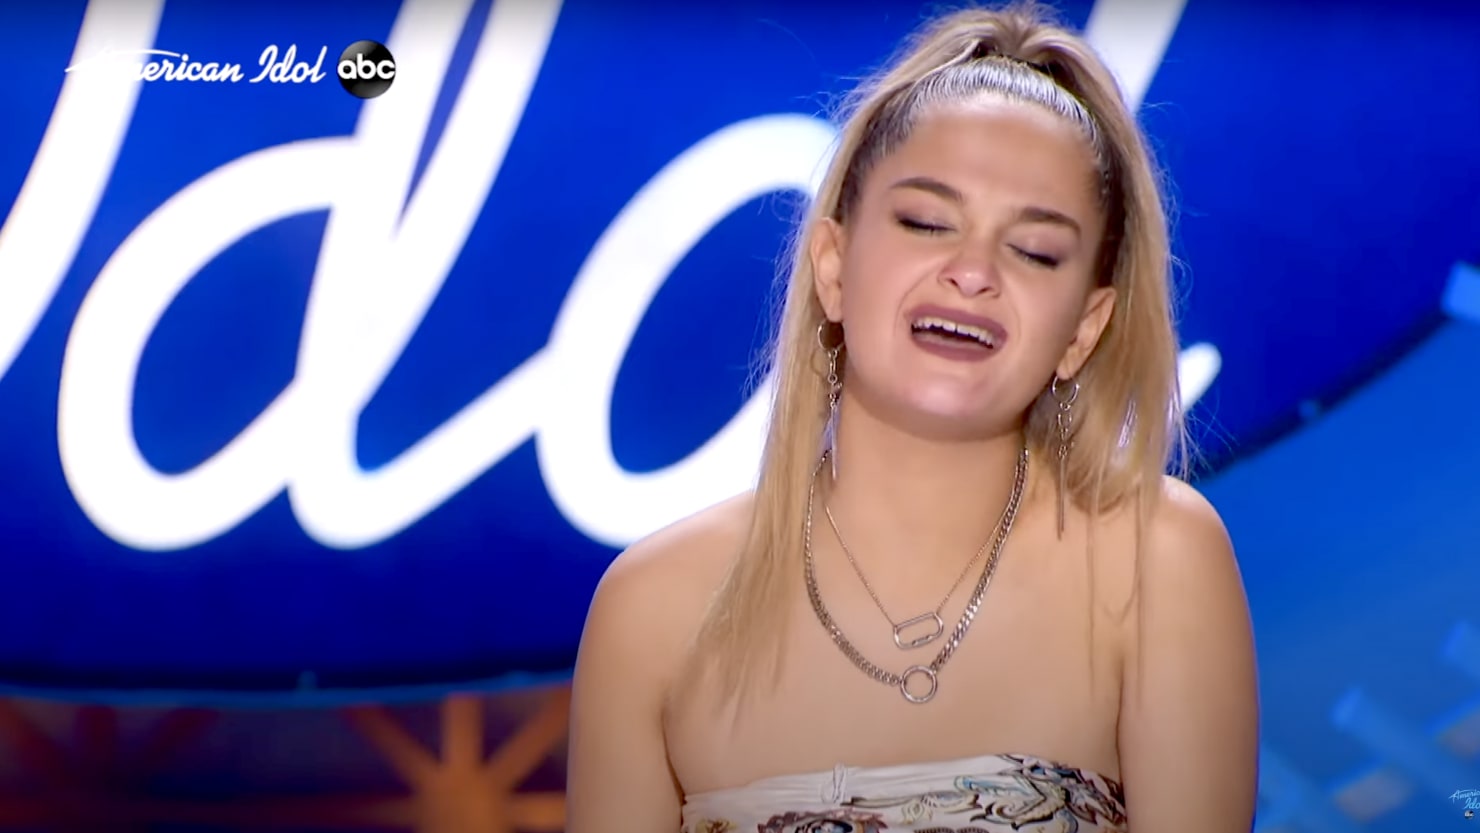 Claudia Conway goes to Hollywood, catches the judges of “American Idol” with Adele and emotional confession